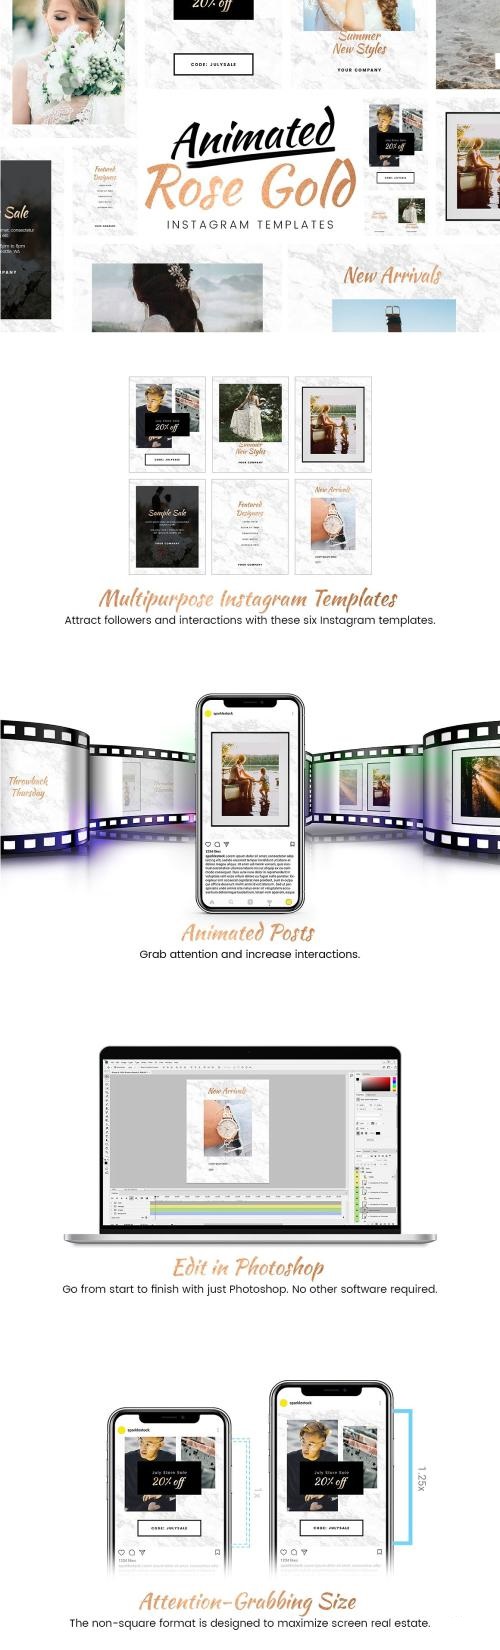 Animated Gold Instagram Templates - 1982947